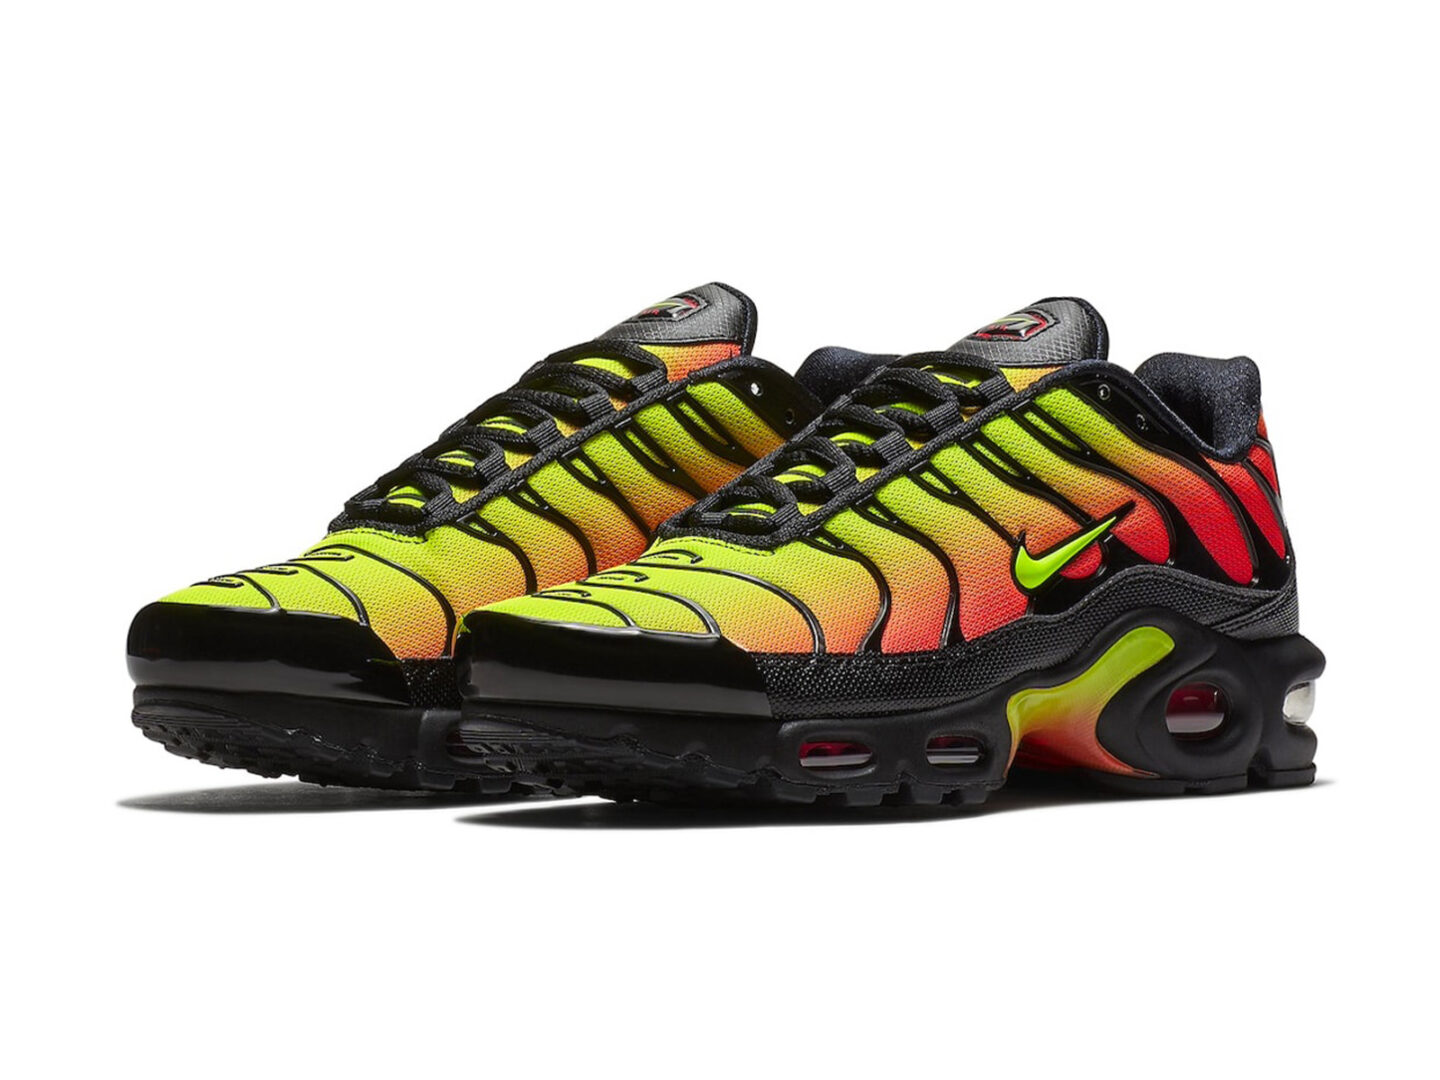 Nike Air Max Plus ‘Volt/Solar Red’ is back